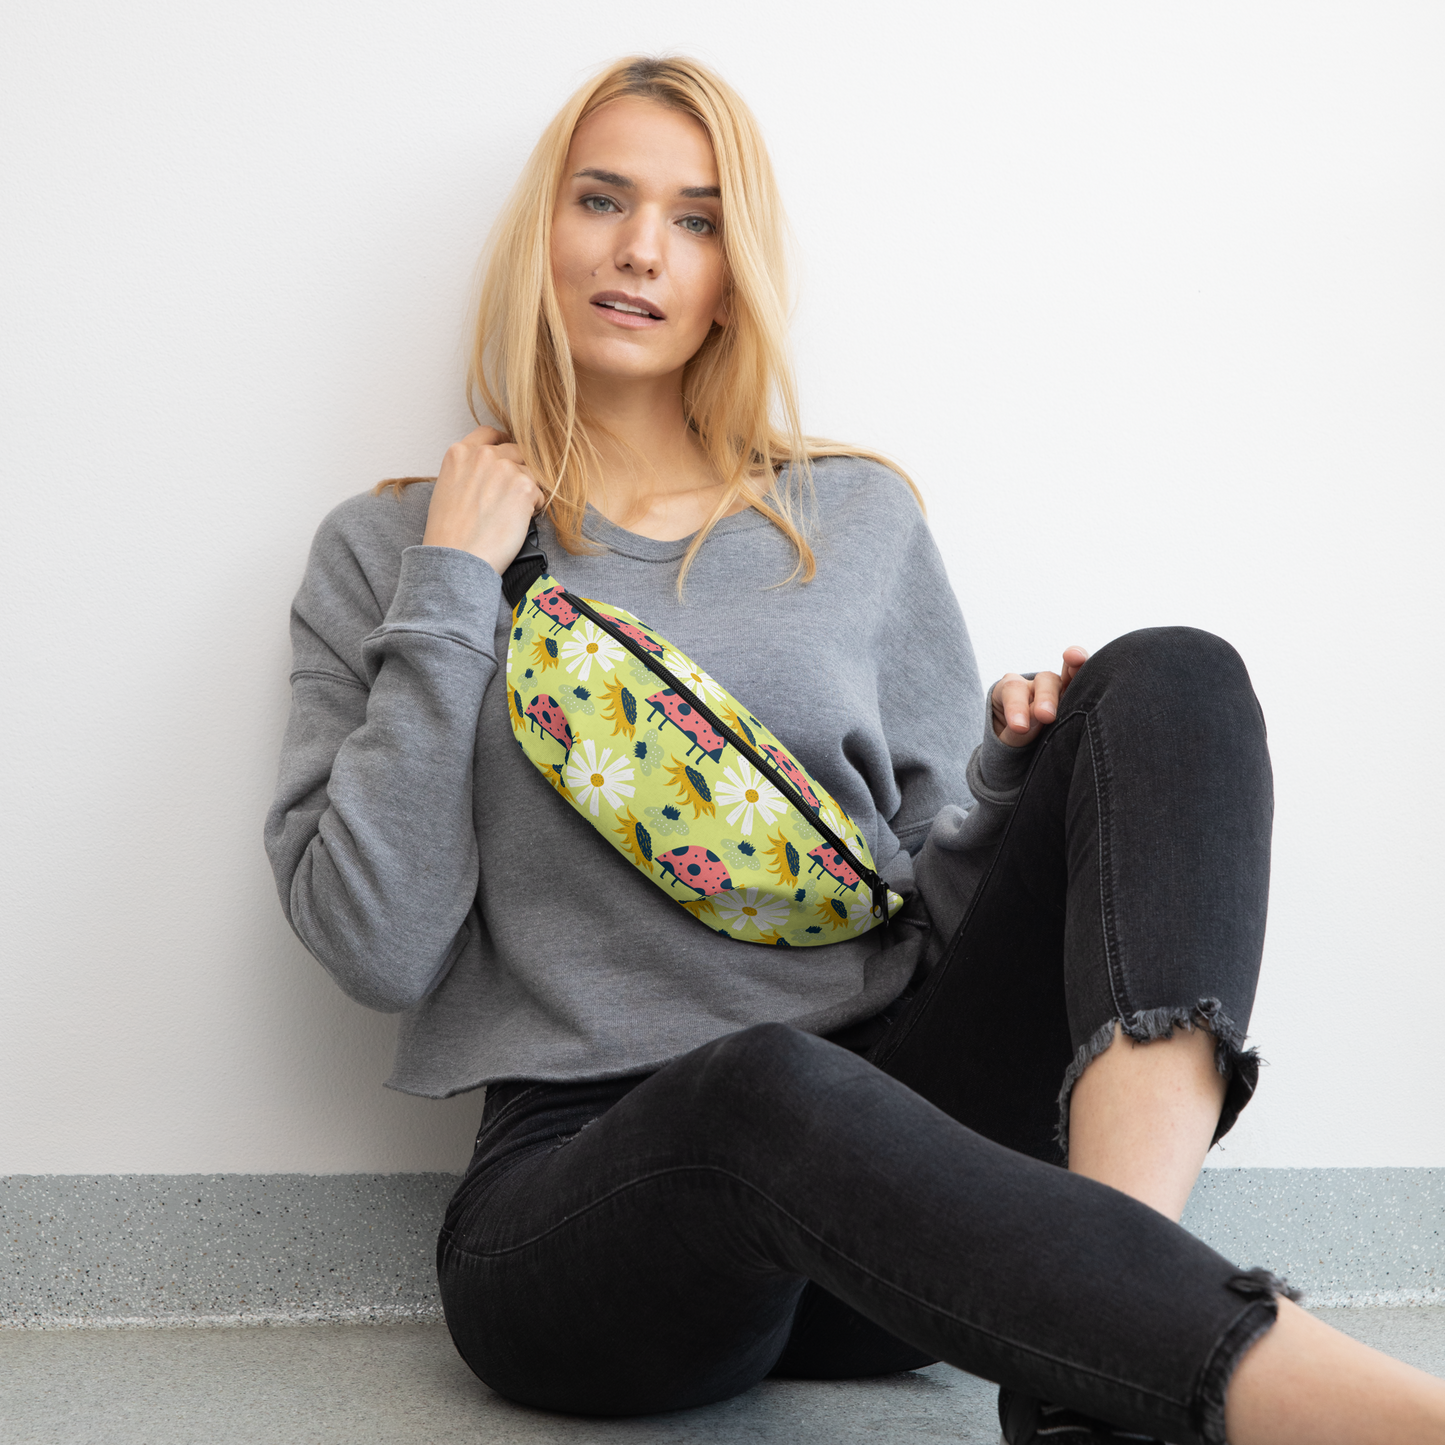 Scandinavian Spring Floral | Seamless Patterns | All-Over Print Fanny Pack - #6